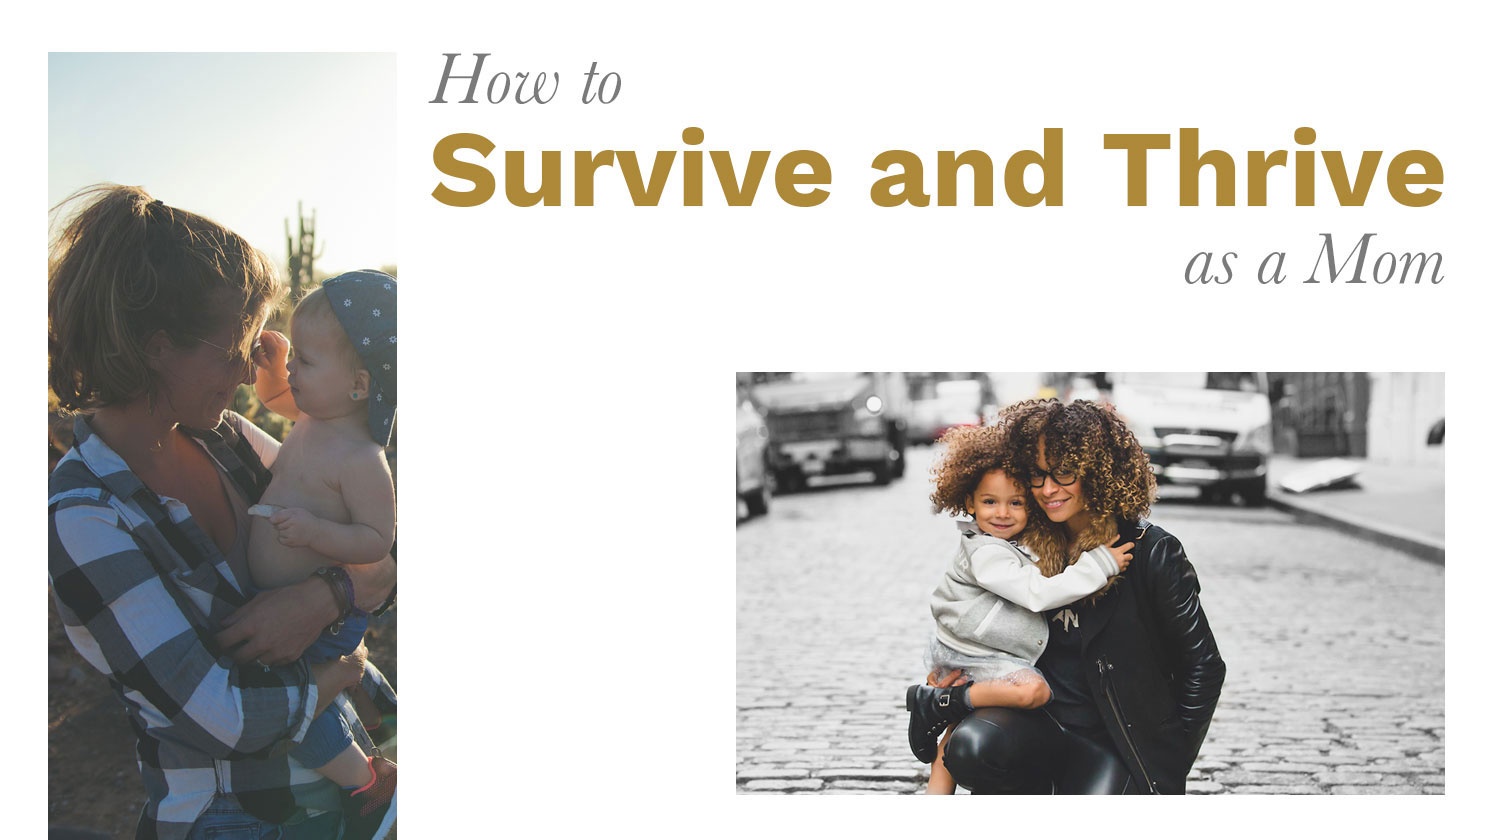 How to Survive and Thrive as a Mom